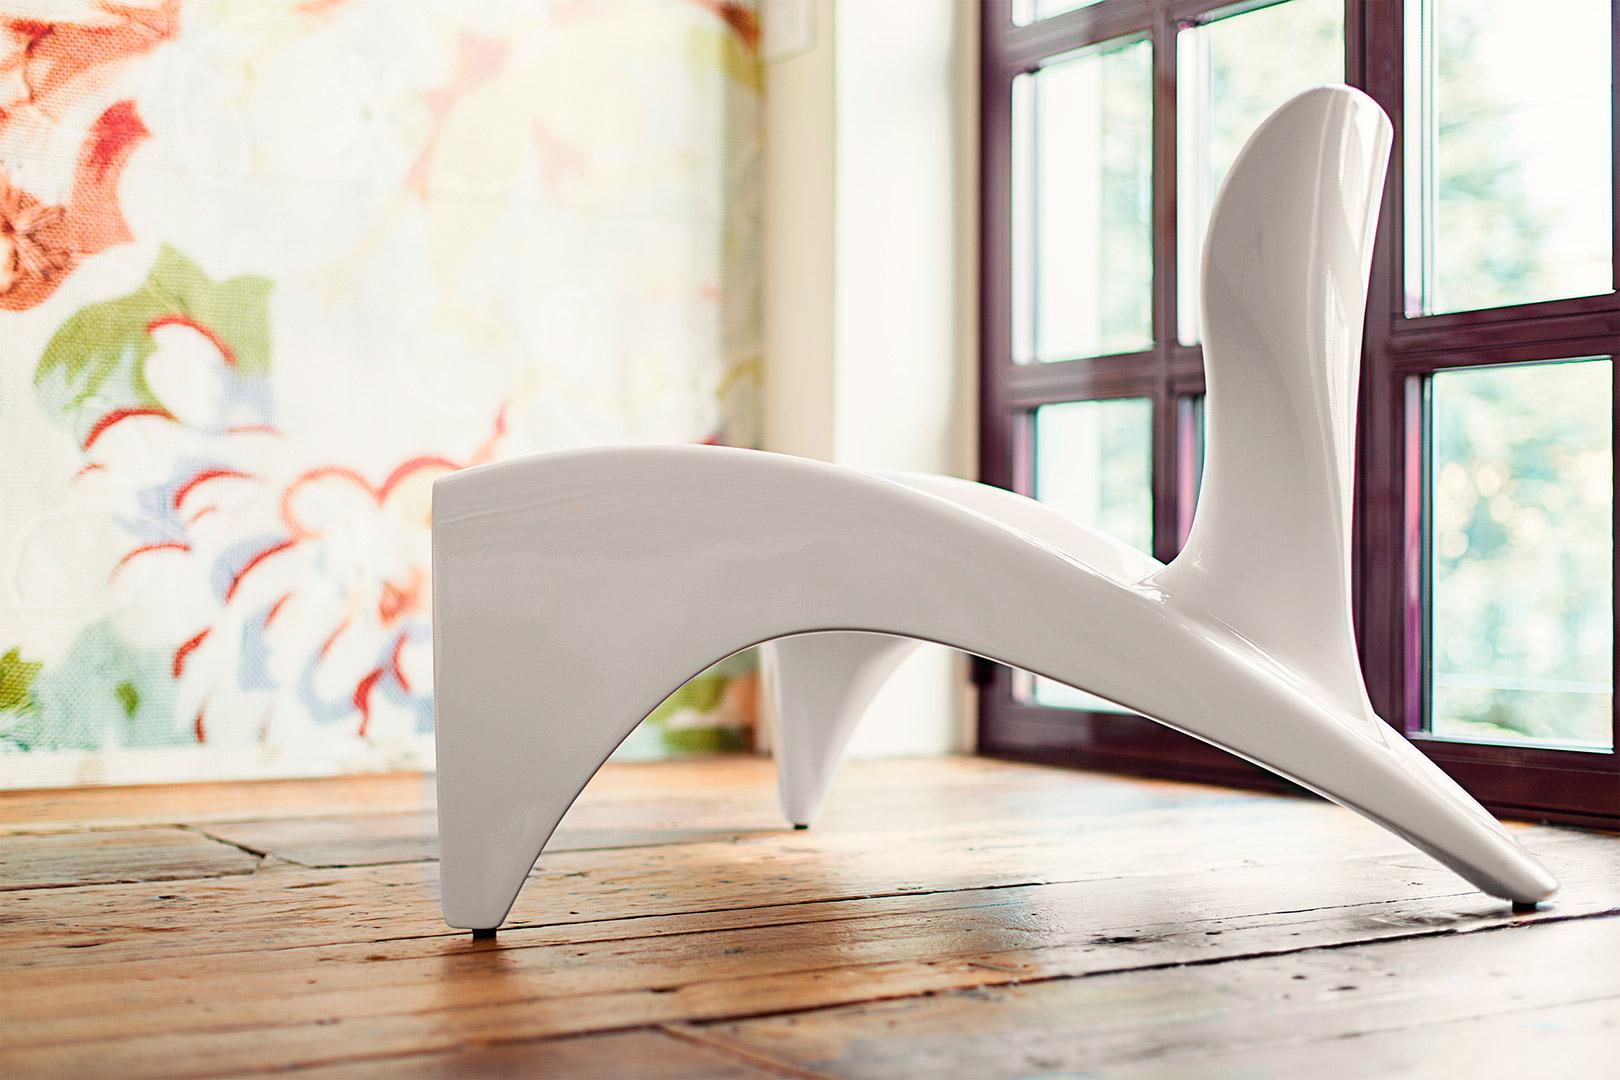 Glossy Absolute White Isetta Low Chair by Marc Sadler
Dimensions: D 86 x W 78 x H 62 cm. Seat Height: 32 cm.
Materials: Polyurethane.
Weight: 13 kg.

Available in different lacquered color options. Available in glossy or matte finishes. This product